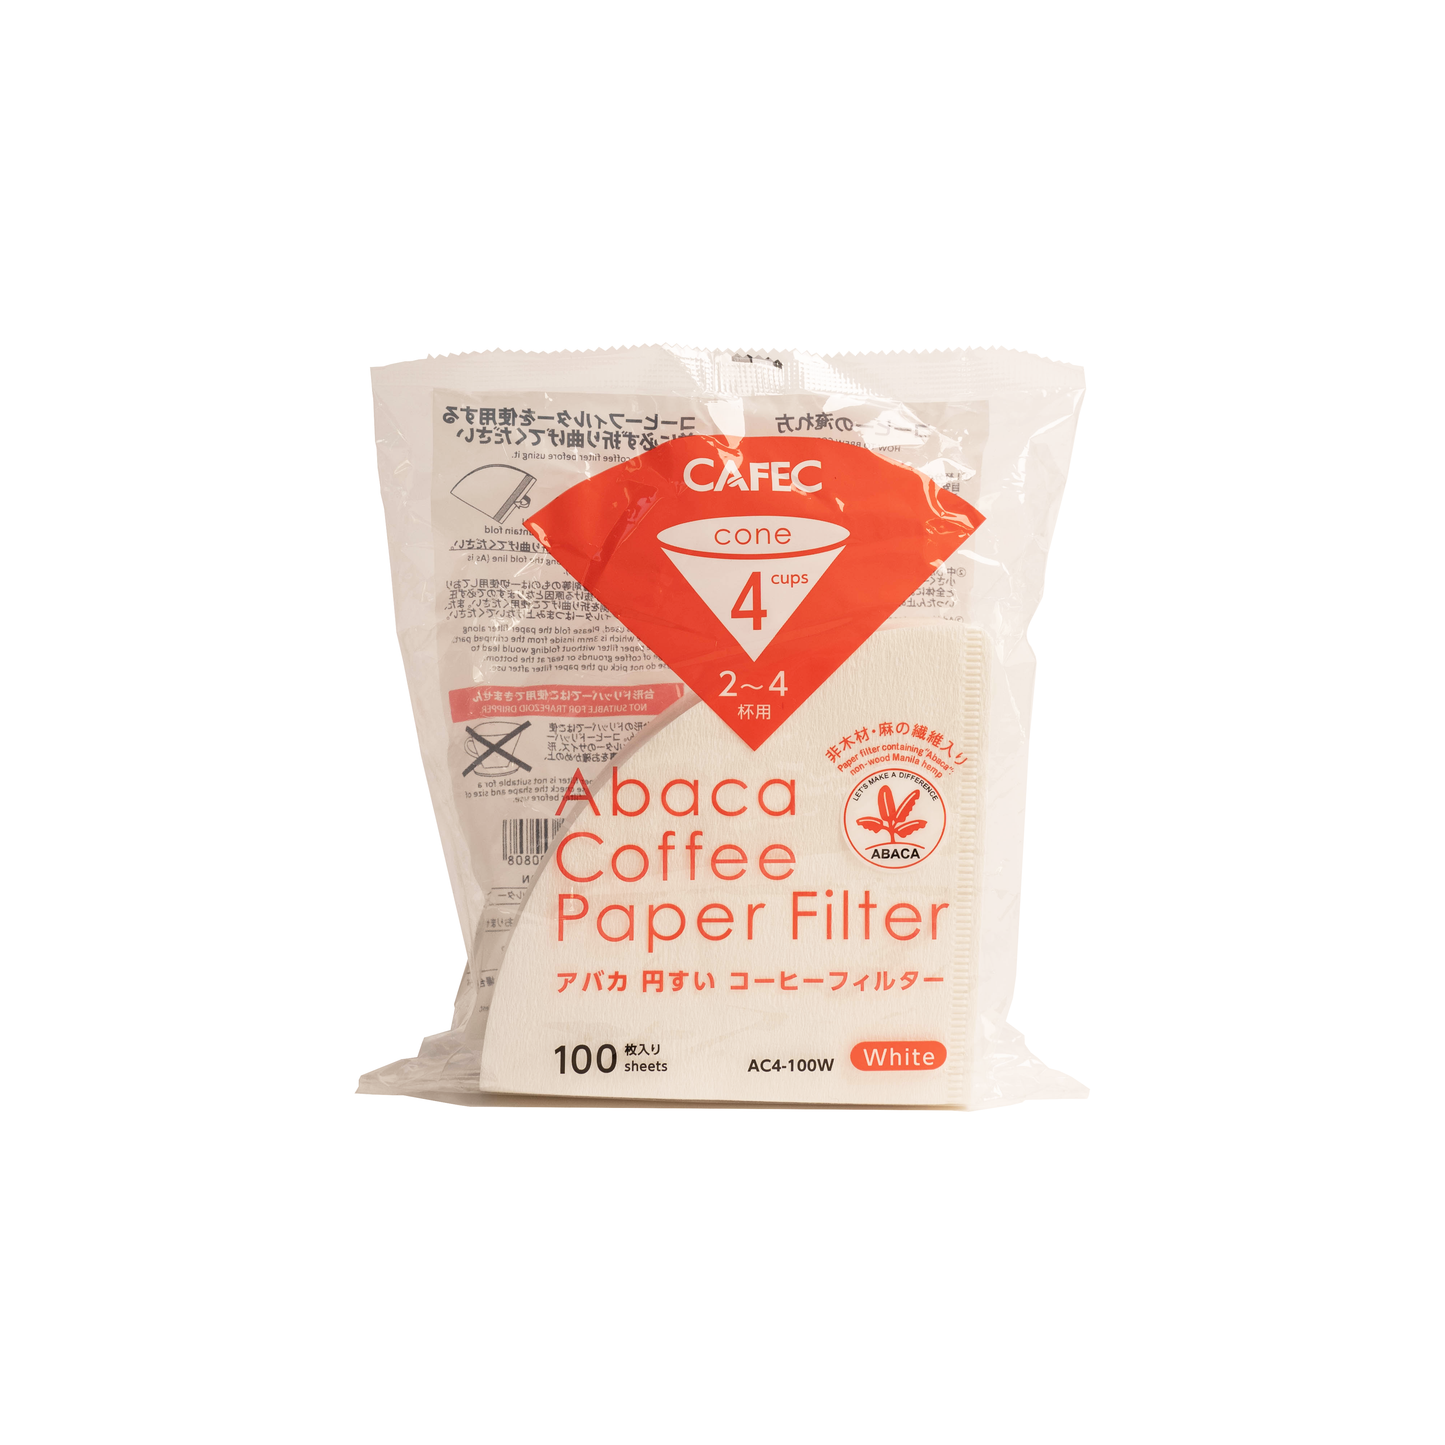 CAFEC - Abaca Coffee Paper Filter